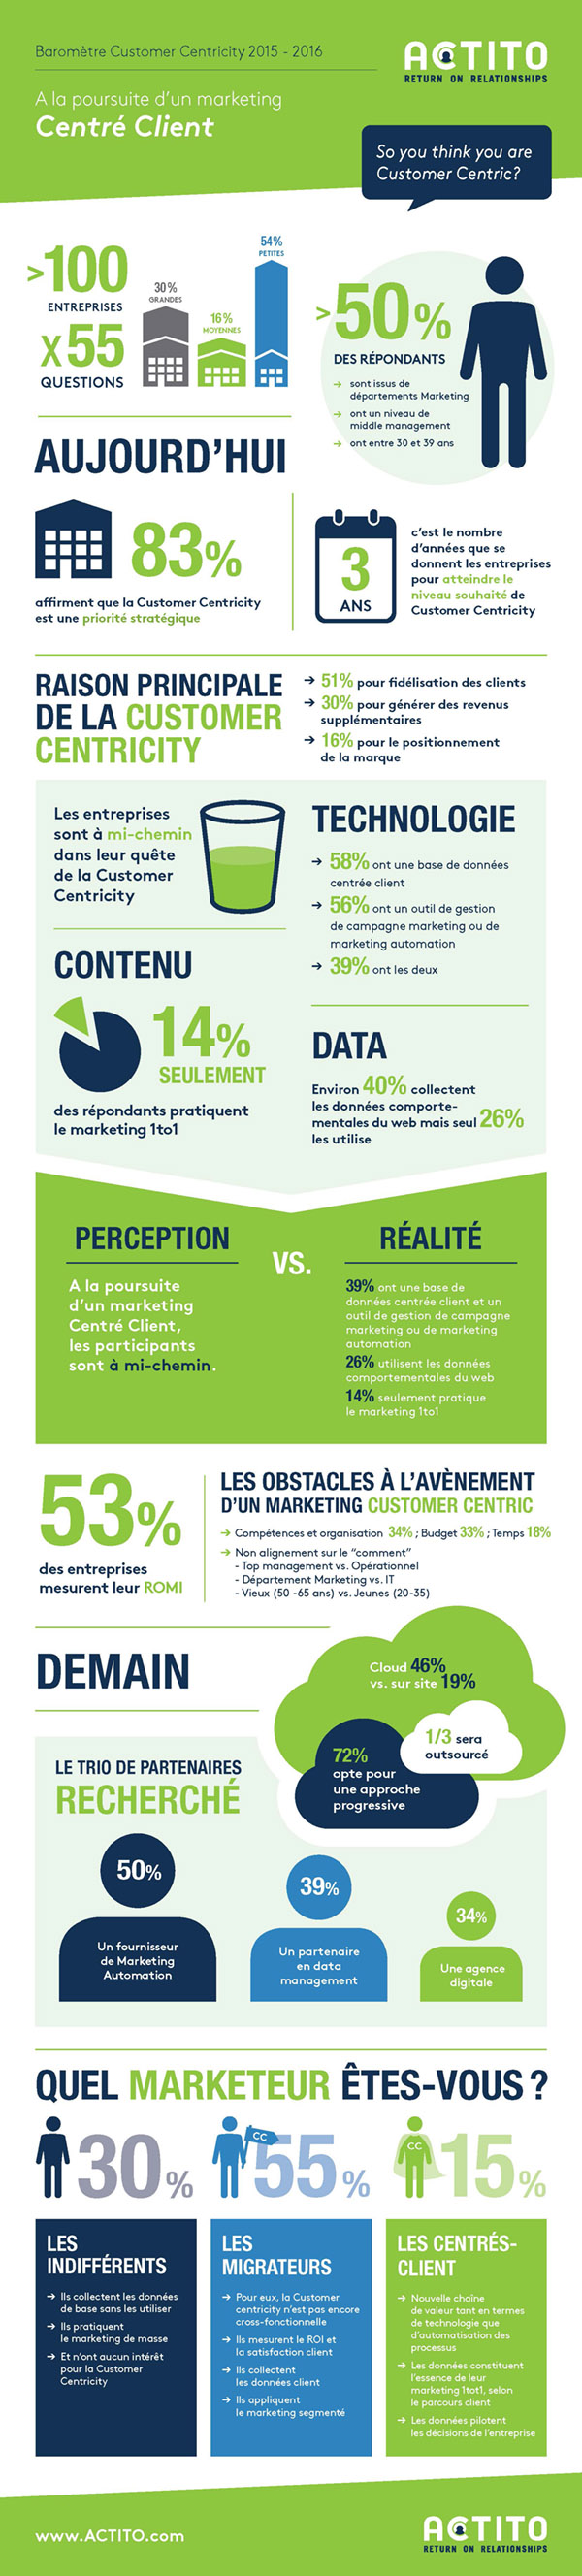 infographie-customer-centricity